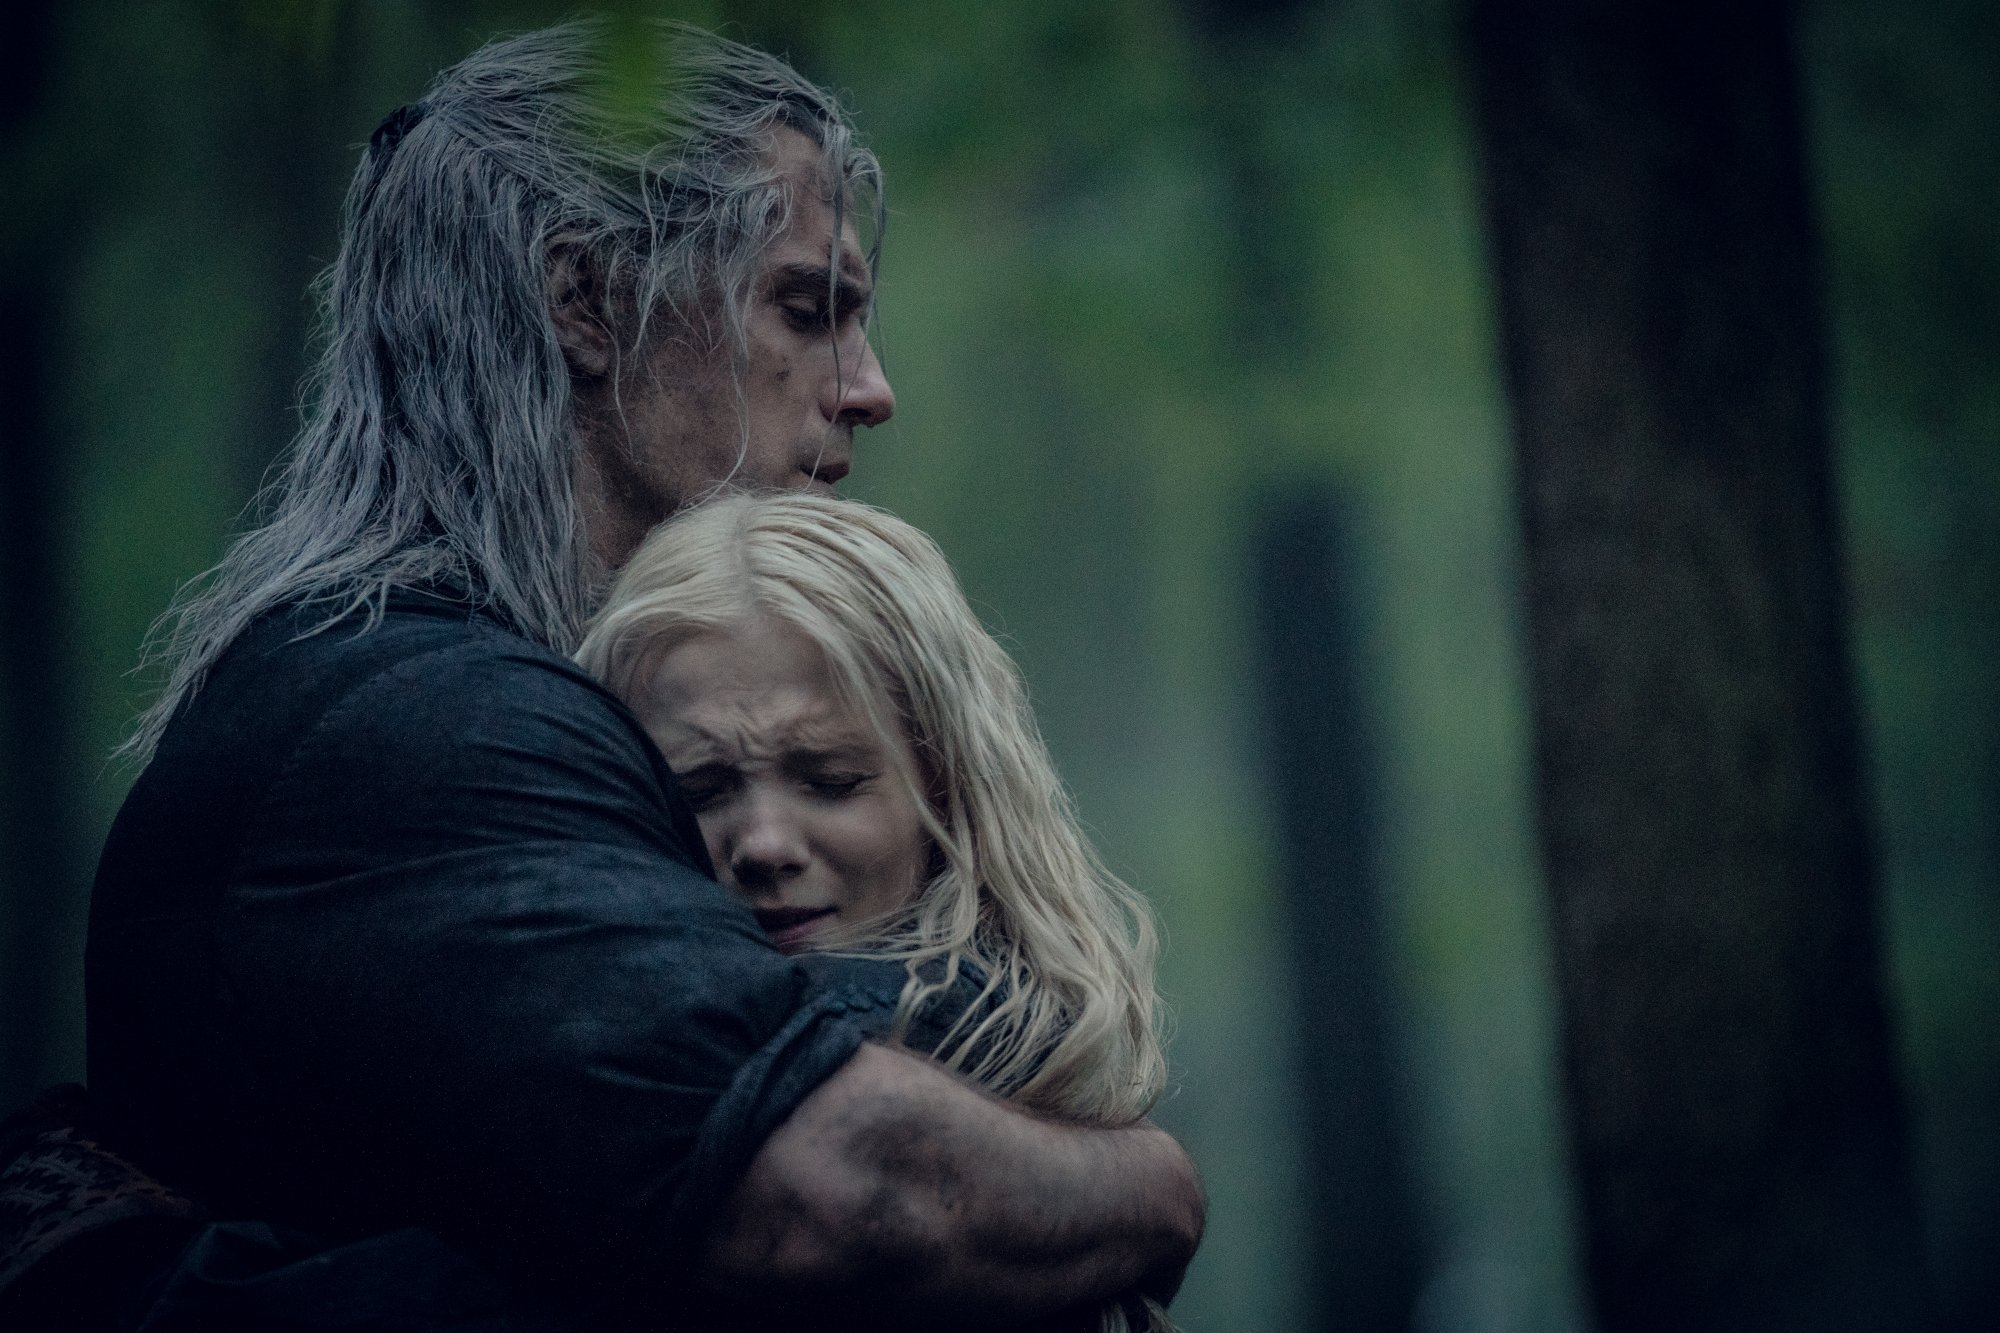 Henry Cavill and Freya Allen as Geralt of Rivia and Ciri in 'The Witcher' Season 1. They're hugging after finding one another but losing Yennefer.